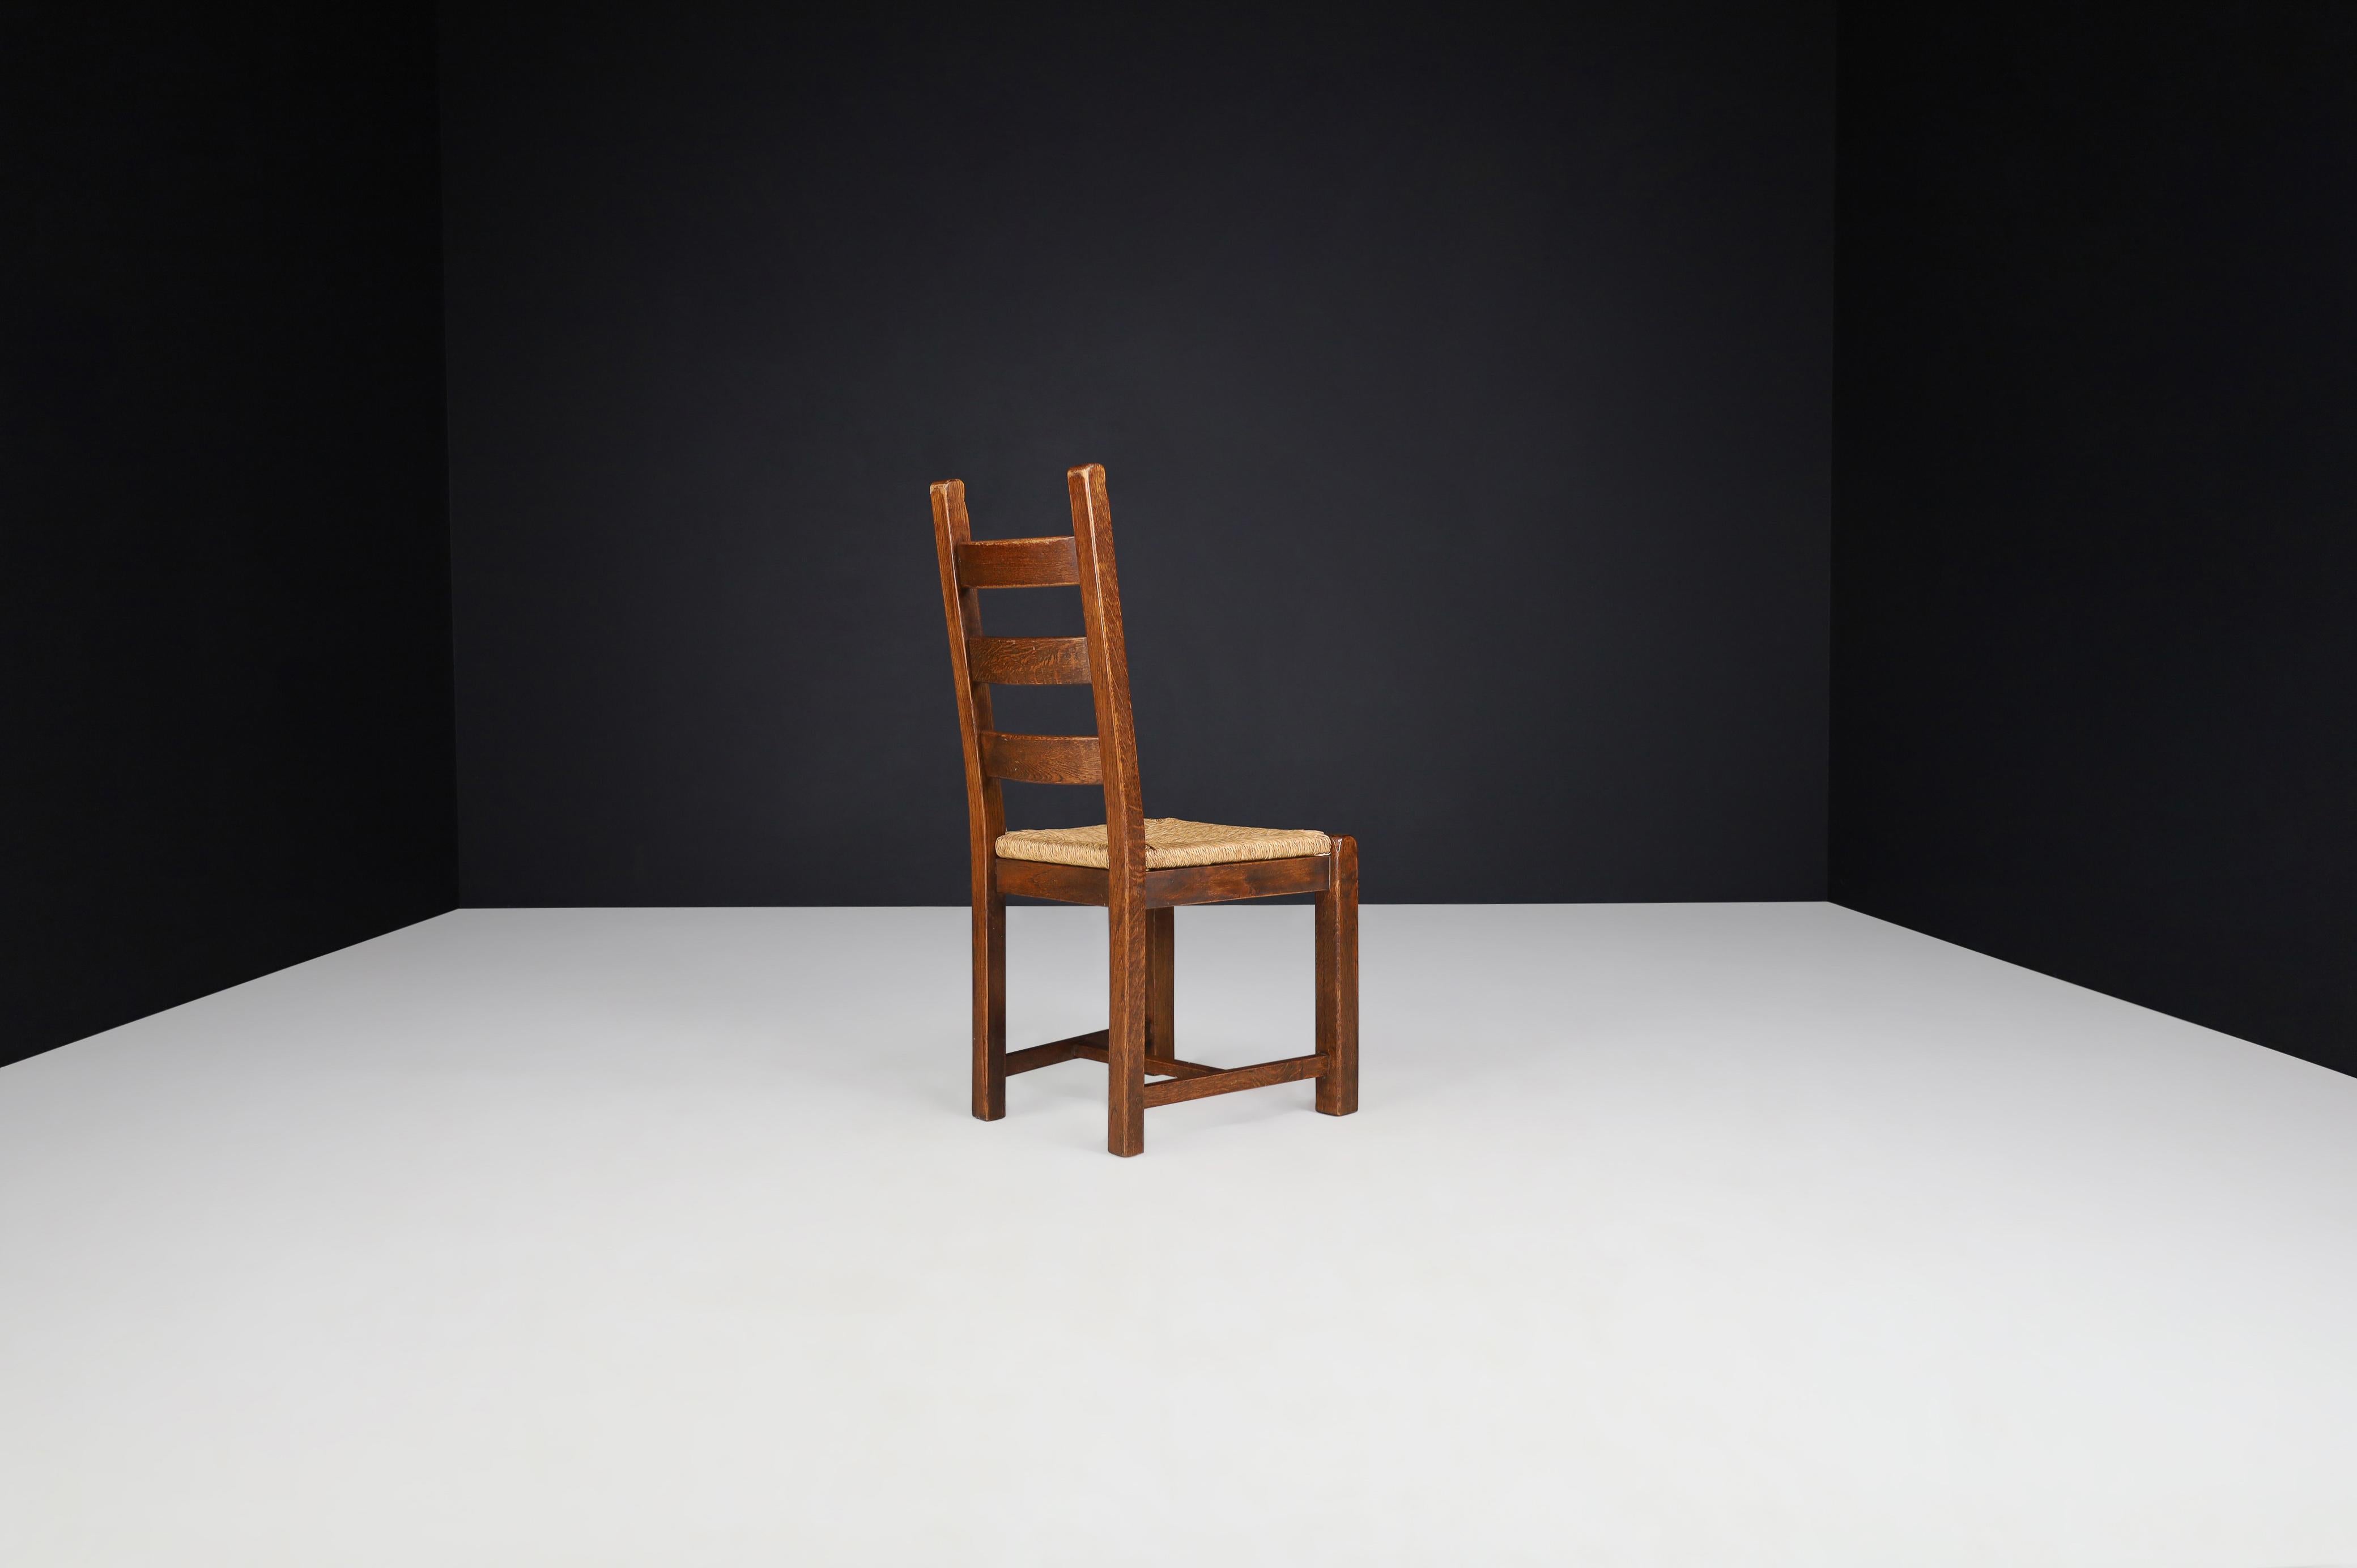 20th Century Oak and Rush Rustic Dining Chairs, France, 1960s For Sale